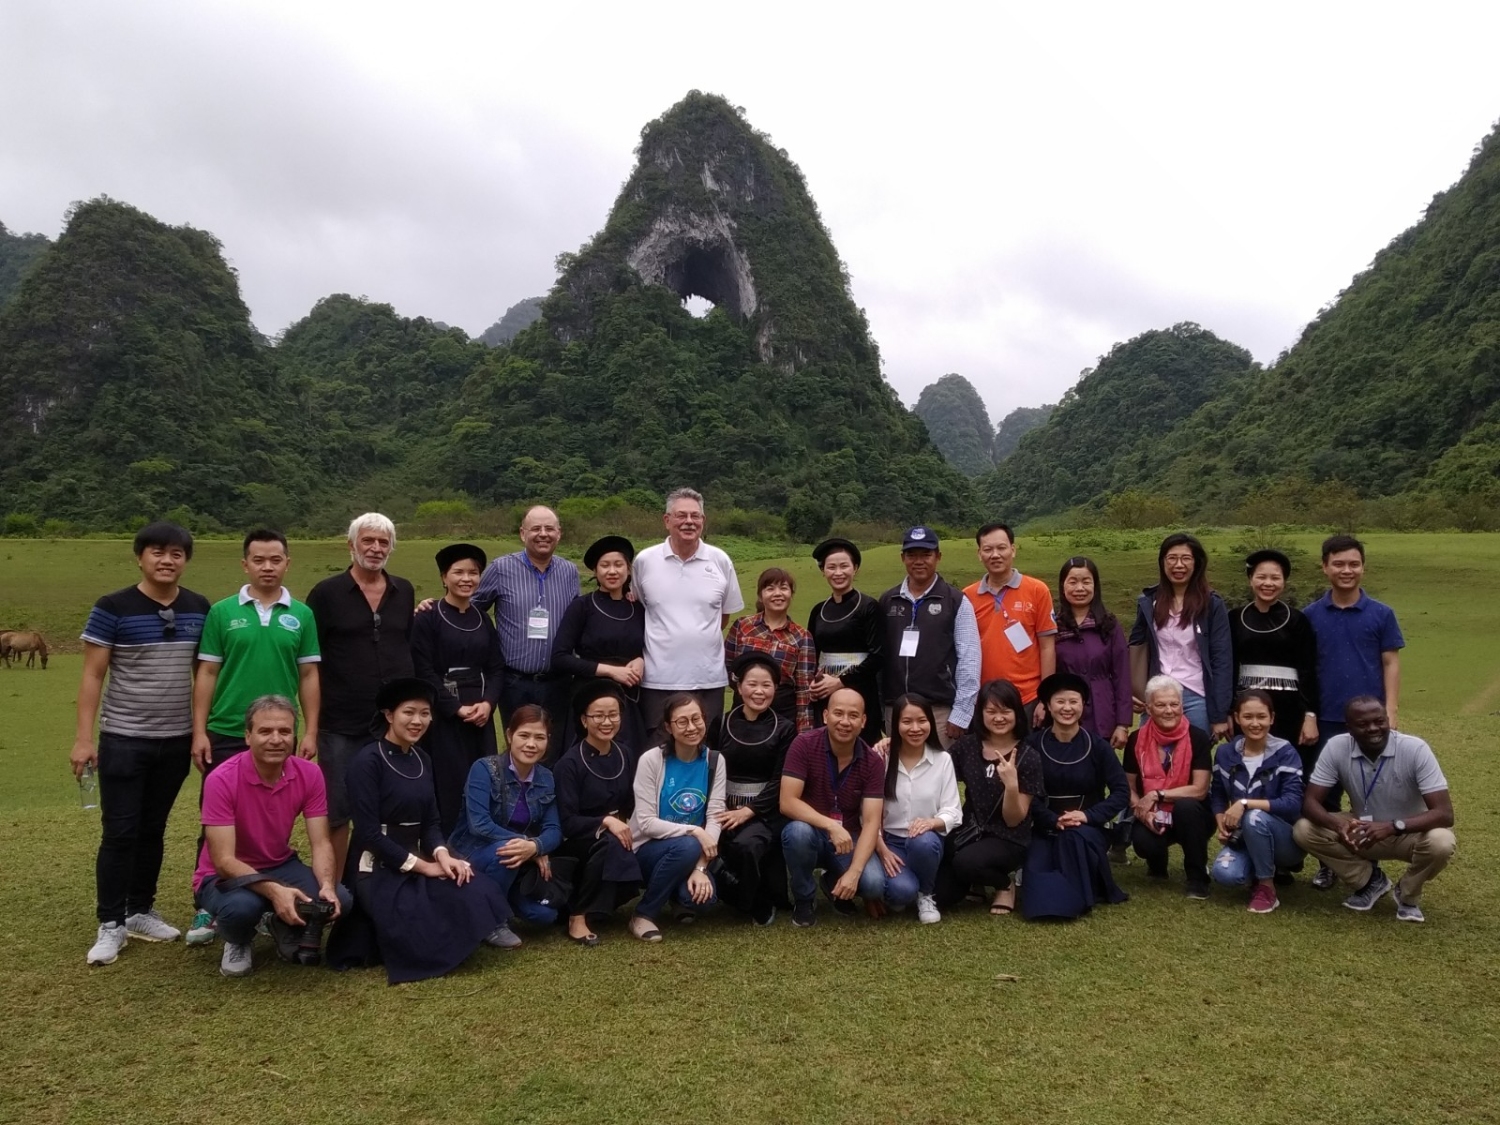 The delegation visited some sites in the Eastern route of Non nuoc Cao Bang UGGp.